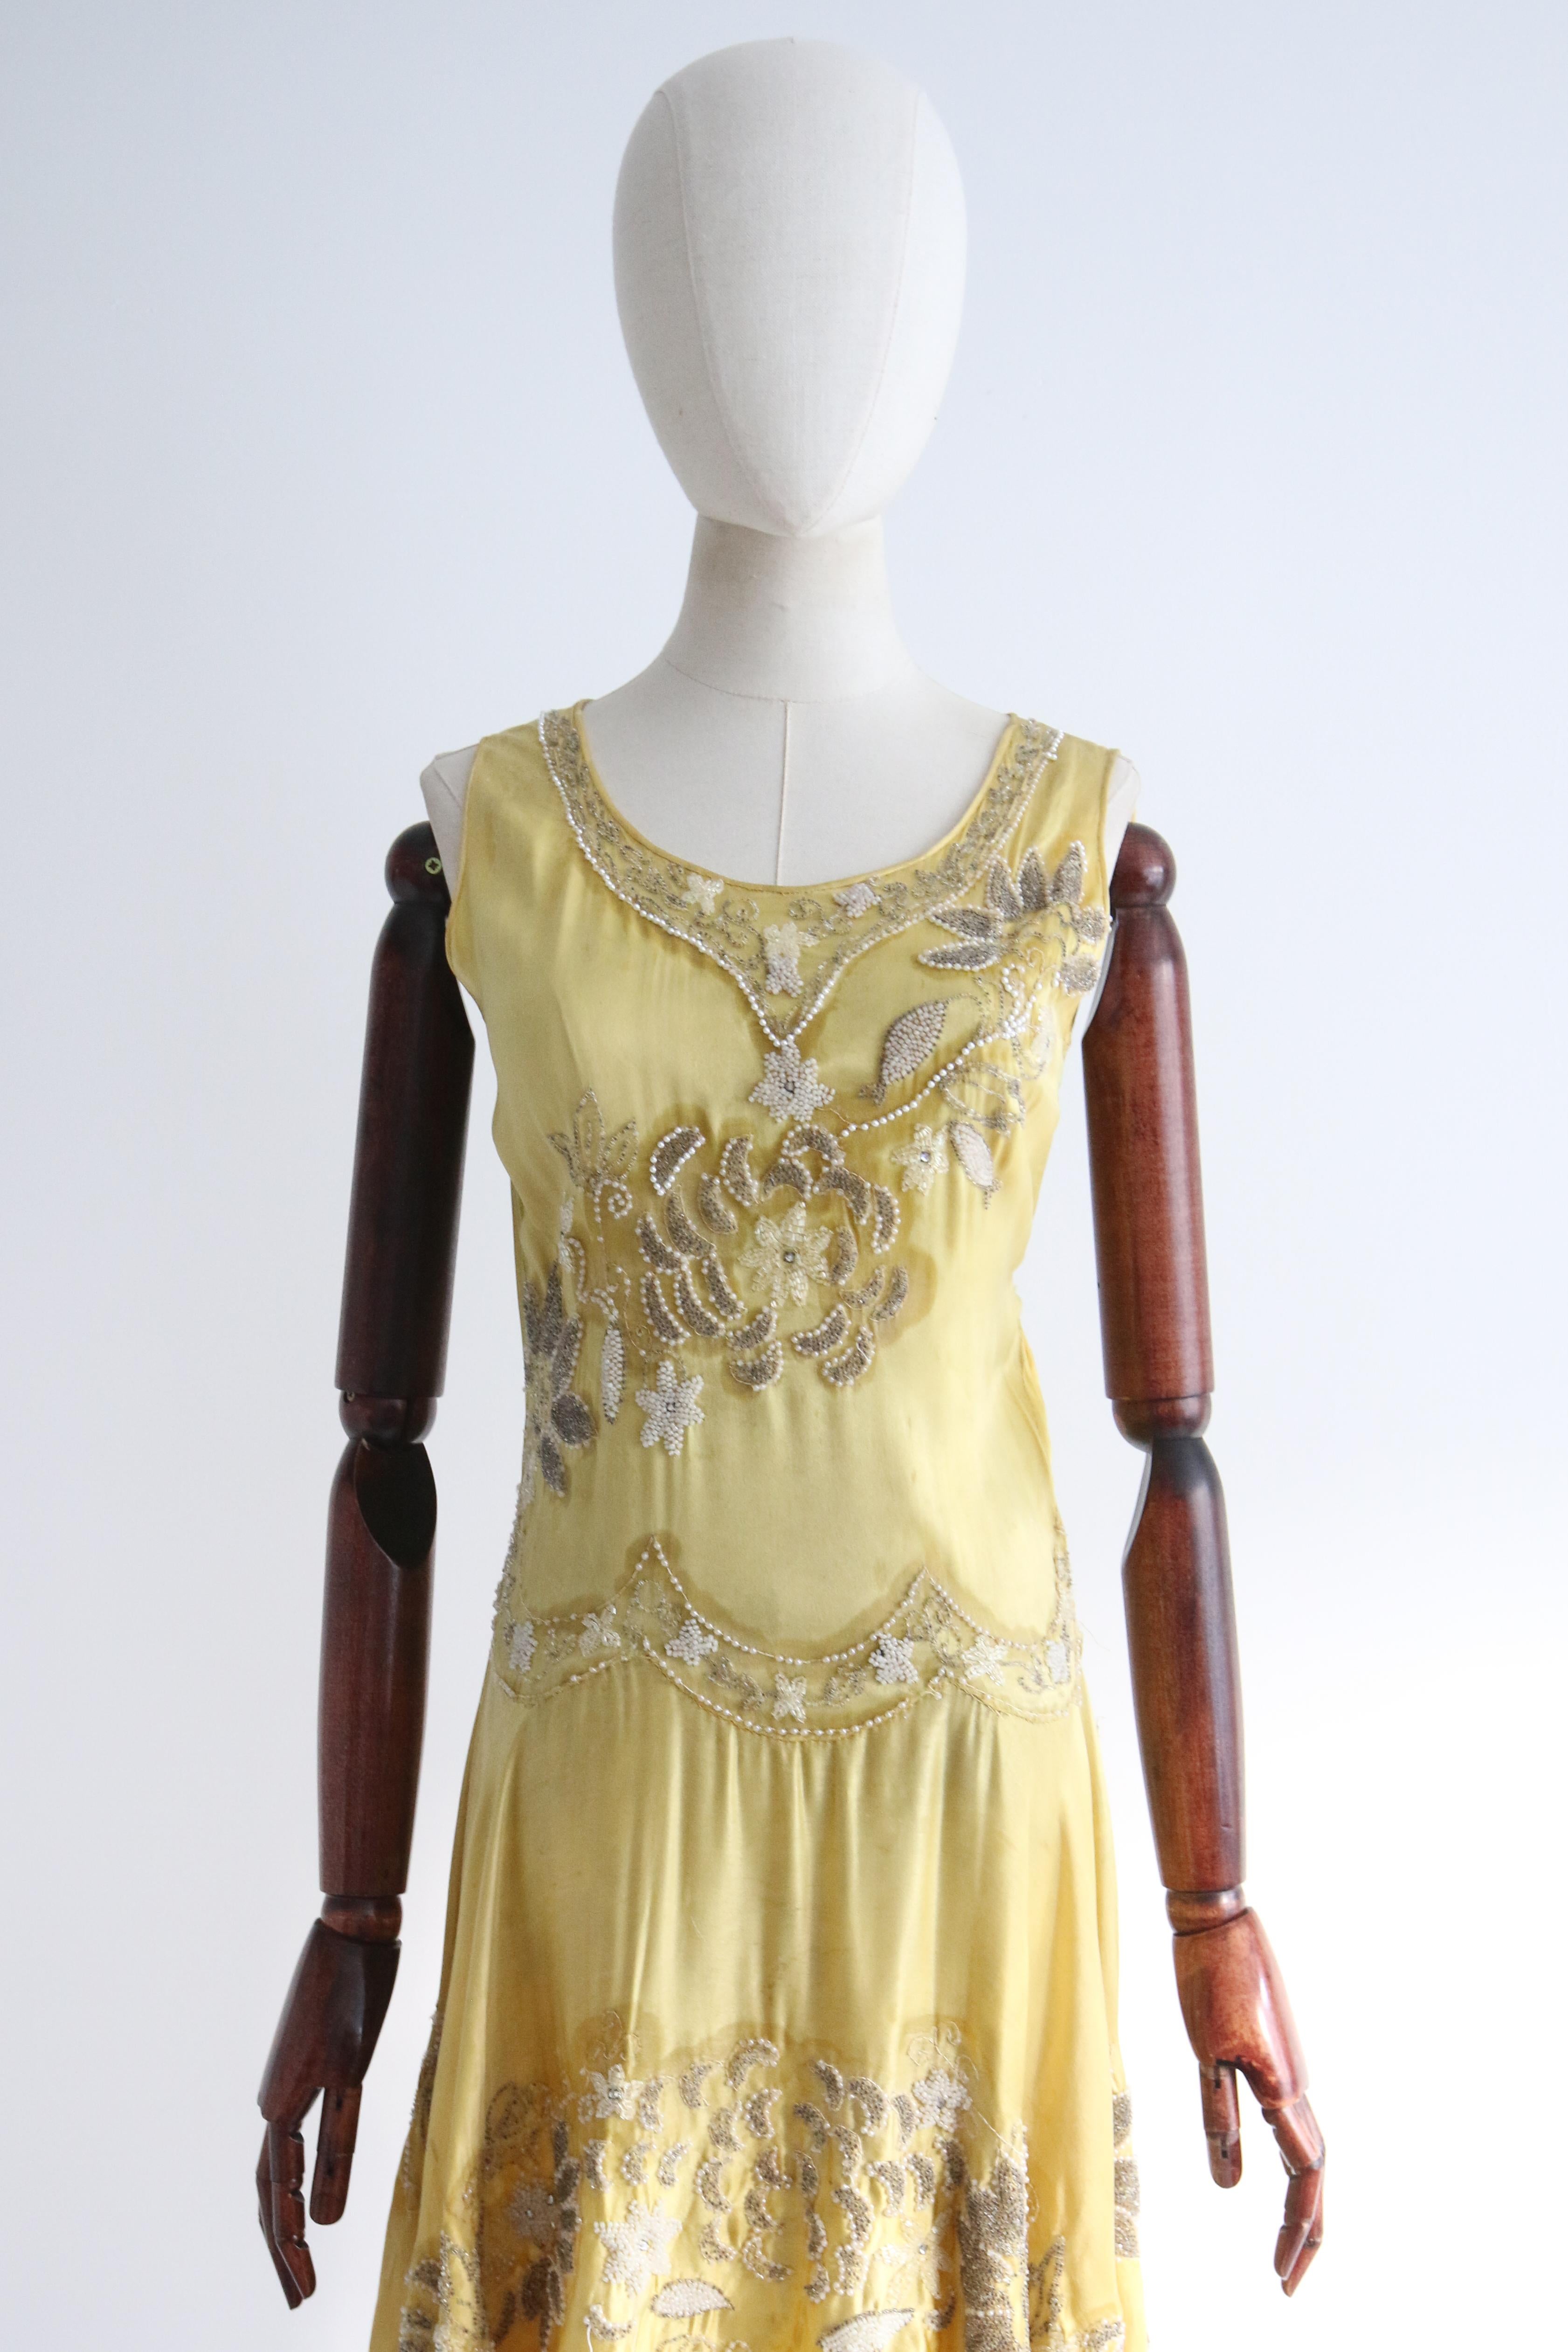 Full of opulent original details, rendered in the most luxurious fashion, this rare 1920's piece is a beauty to behold and never again find.

The rounded neckline of the dress is framed by pipped edgings and accented by a decorative beaded neckline,